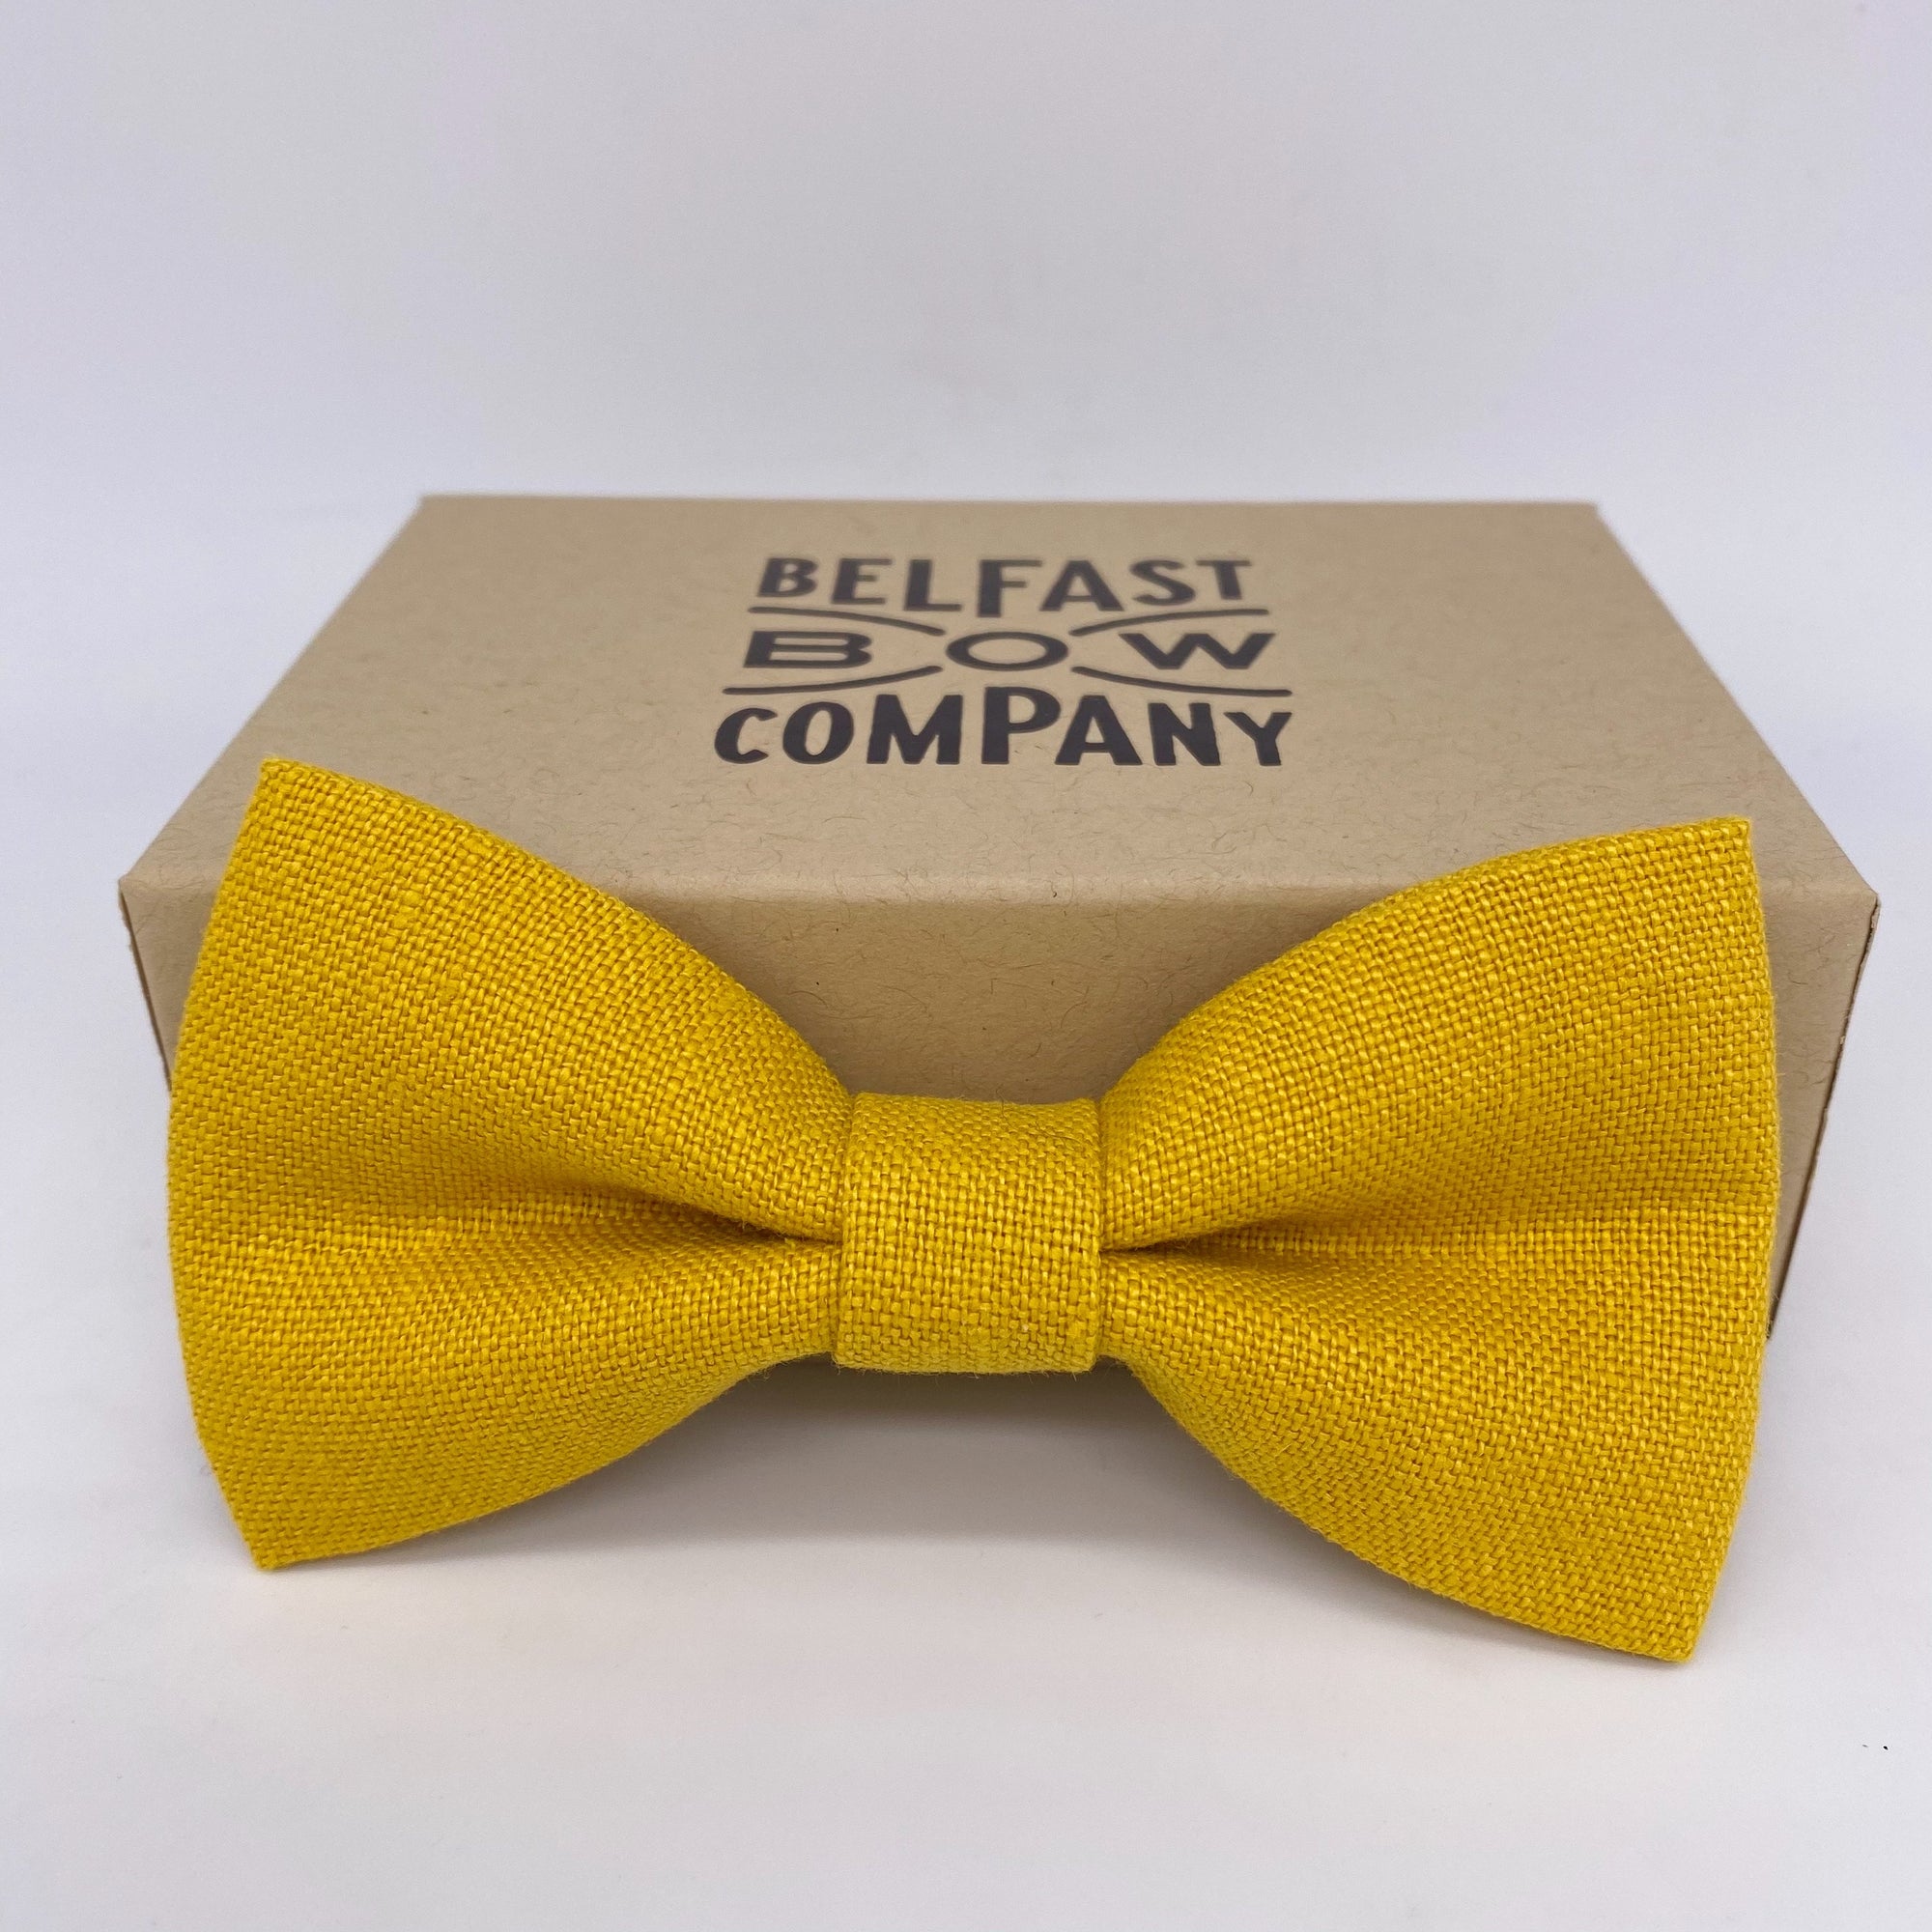 Irish Linen Bow Tie in Harland and Wolff Yellow by the Belfast Bow Company